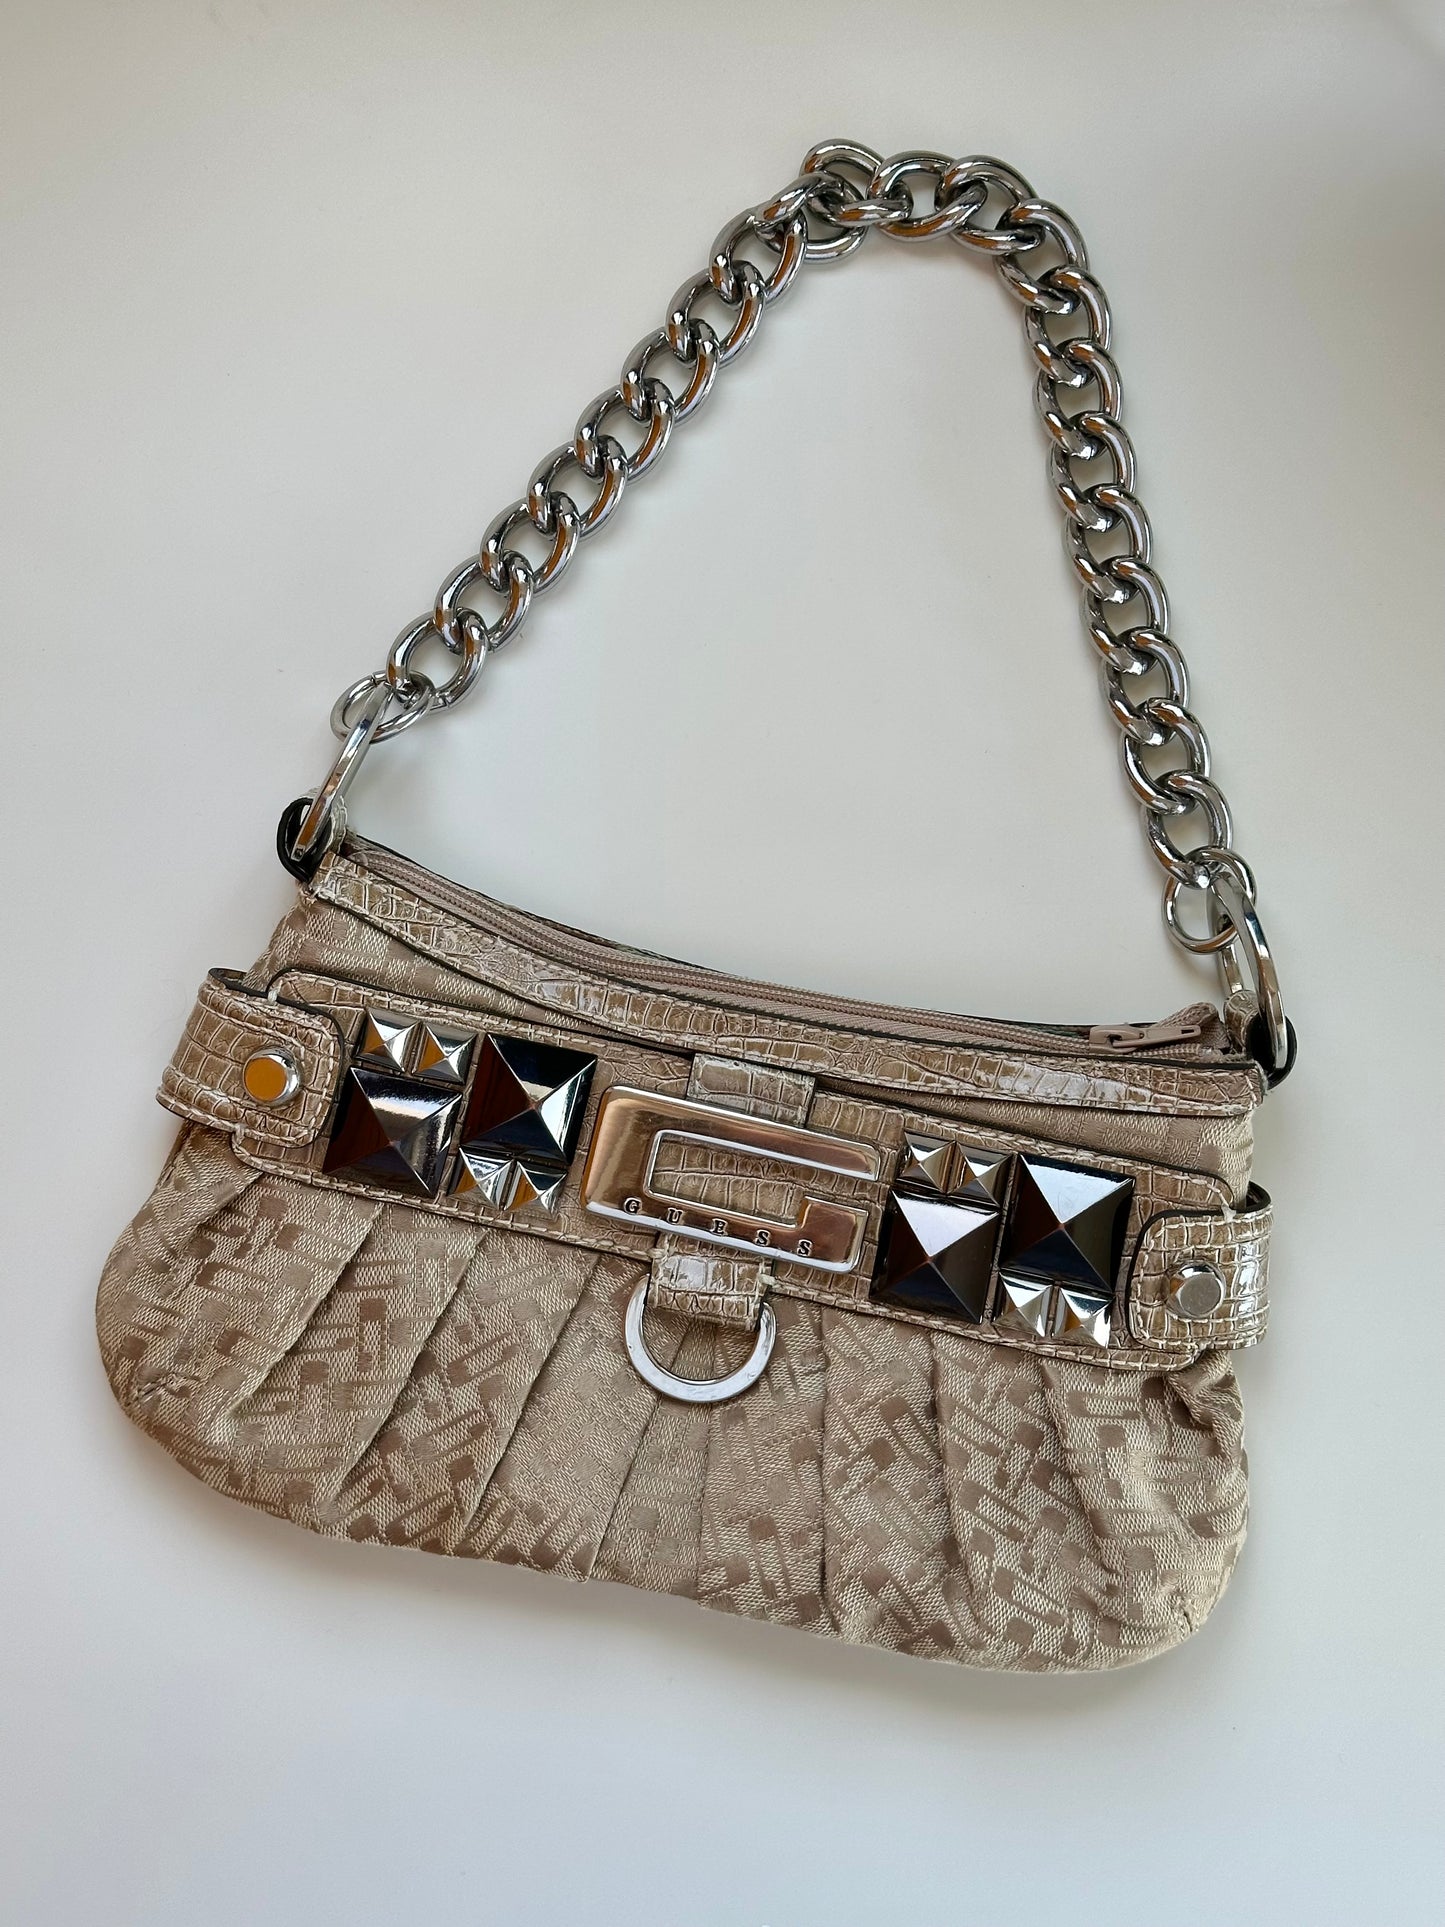 Trendy vintage Guess bag from 00s